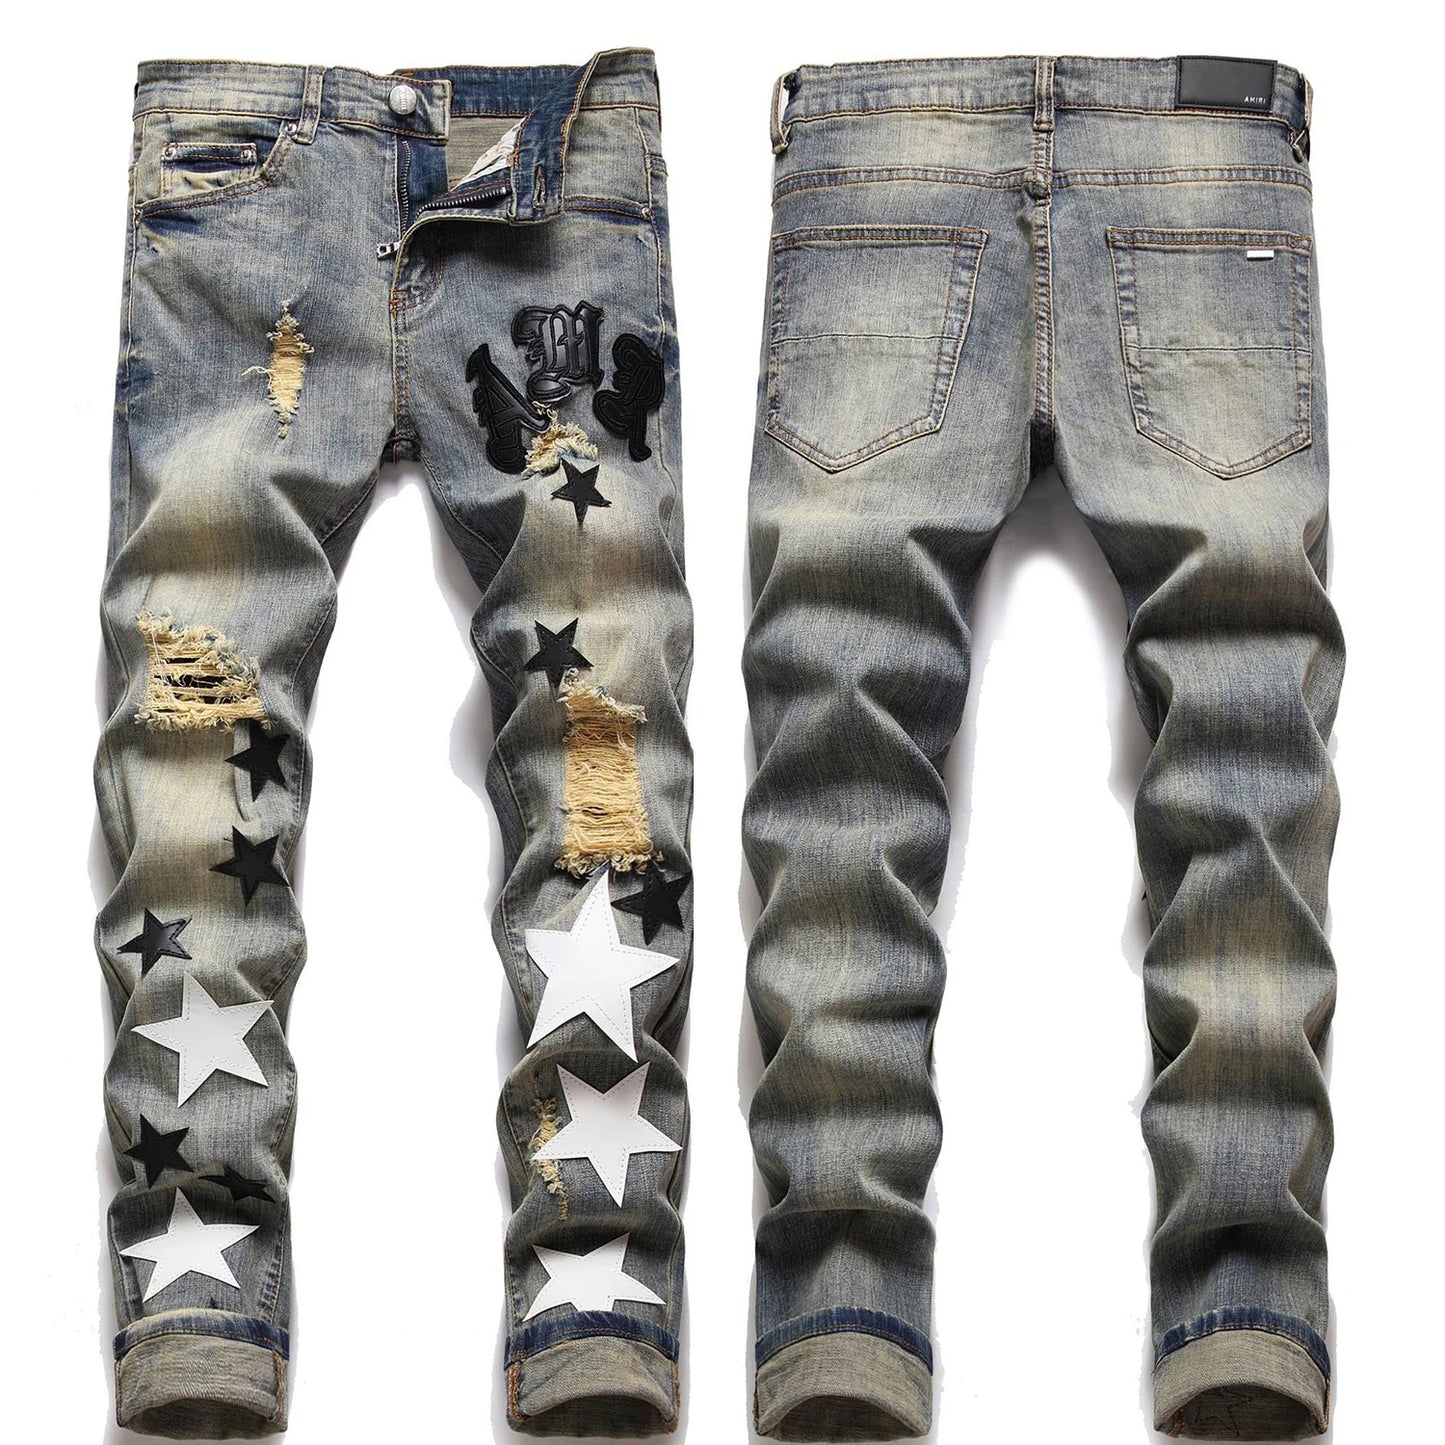 High Quality Men’s Slim-fit Hole Ripped Blue Jeans,Light Luxury Embroidery Decorating Hip Hop Jeans,Stylish Sexy Street Jeans;